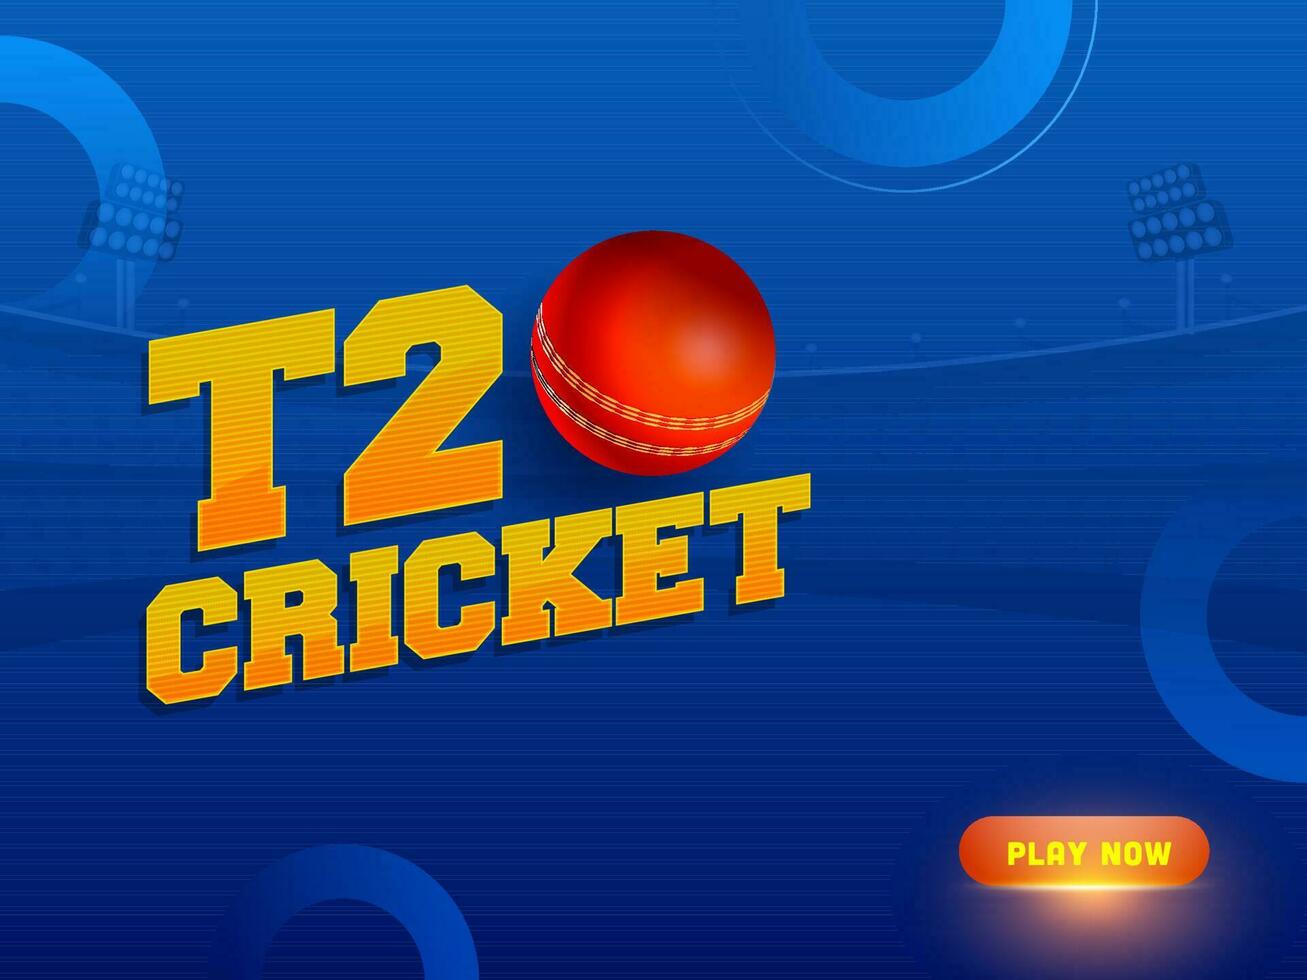 T20 Cricket Text With Realistic Red Ball On Blue Stadium View Background with Space for your Message. vector